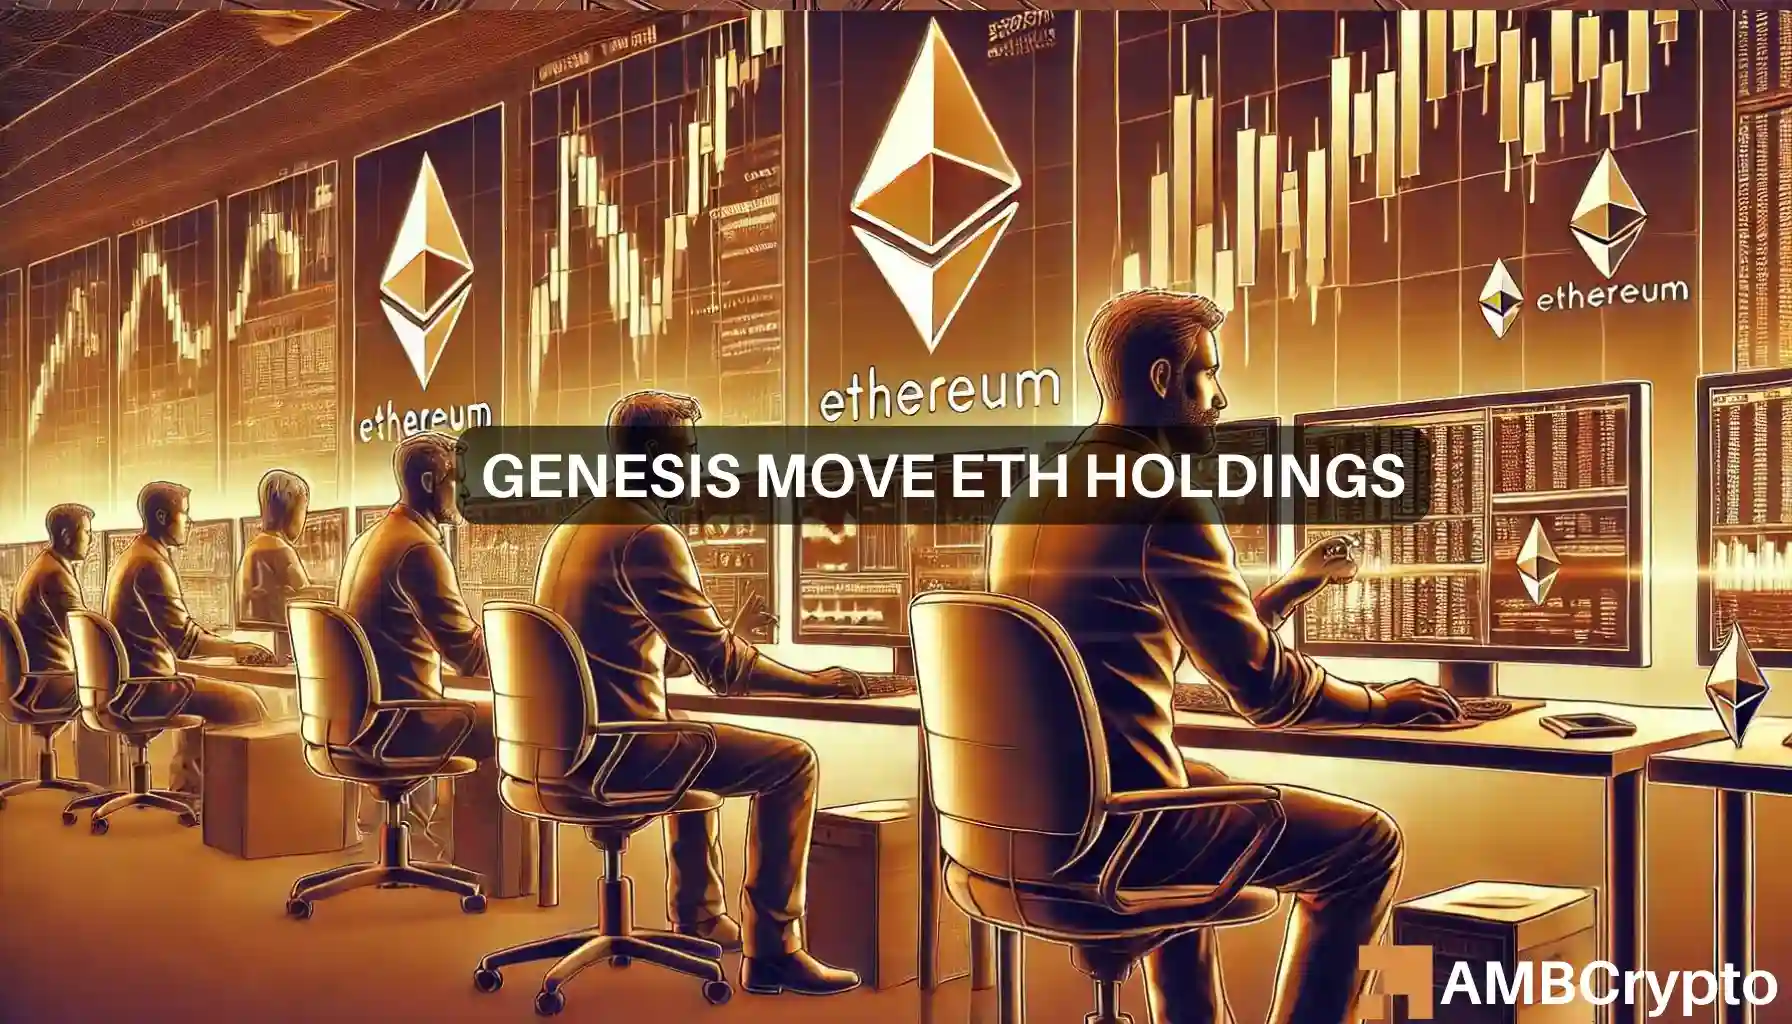 Ethereum - Genesis makes $127M move, but where does that leave traders?